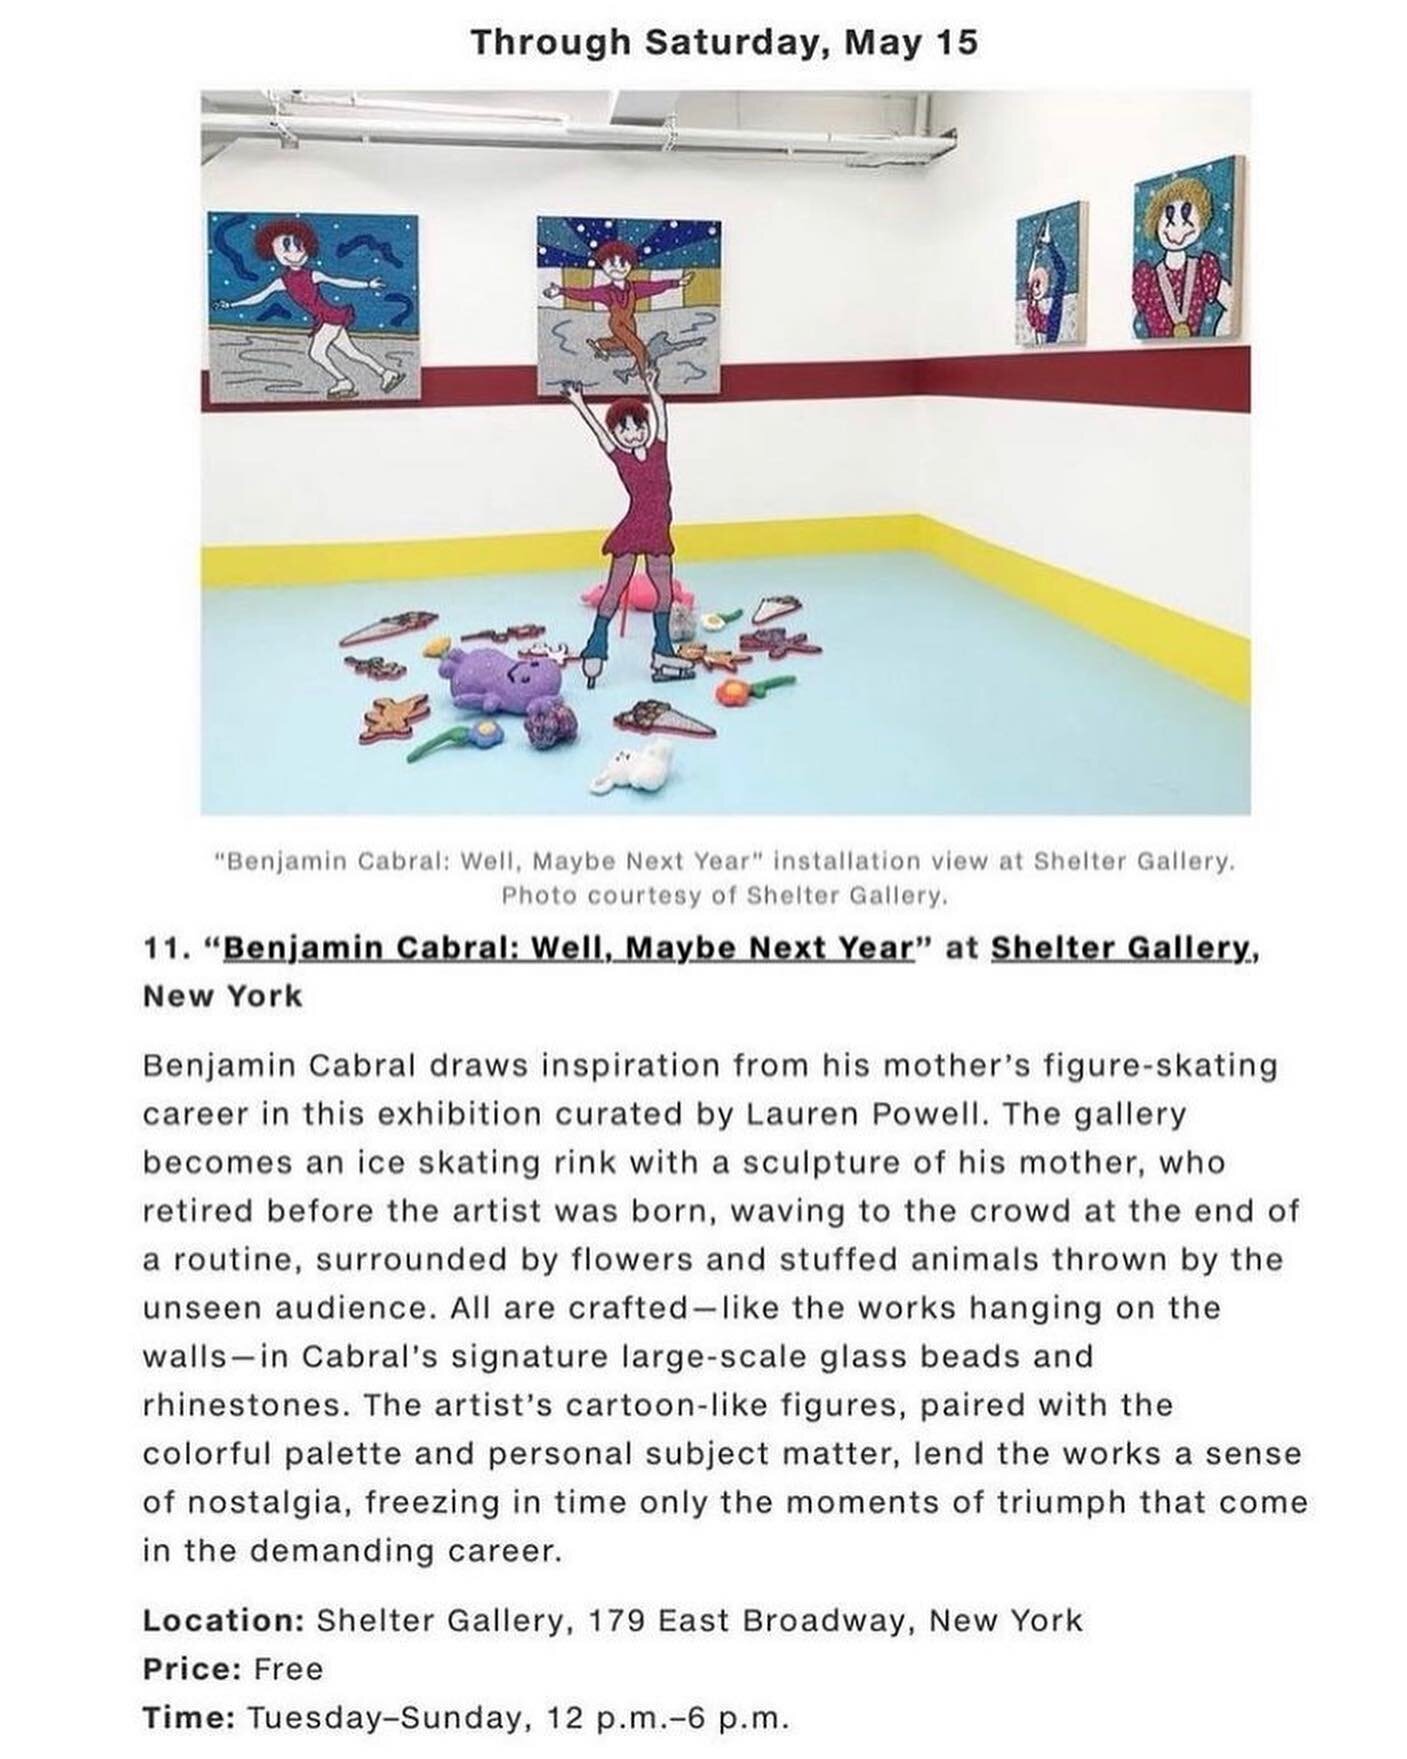 💫did you know that @benjamincabral &lsquo;s 𝘞𝘦𝘭𝘭, 𝘔𝘢𝘺𝘣𝘦 𝘕𝘦𝘹𝘧 𝘠𝘦𝘢𝘳 at @shelter_gallery curated by #laurenpowellart was recommended as a top 12 things for your art📆 in this art world we live in by @artnet this week? &amp; how perfect